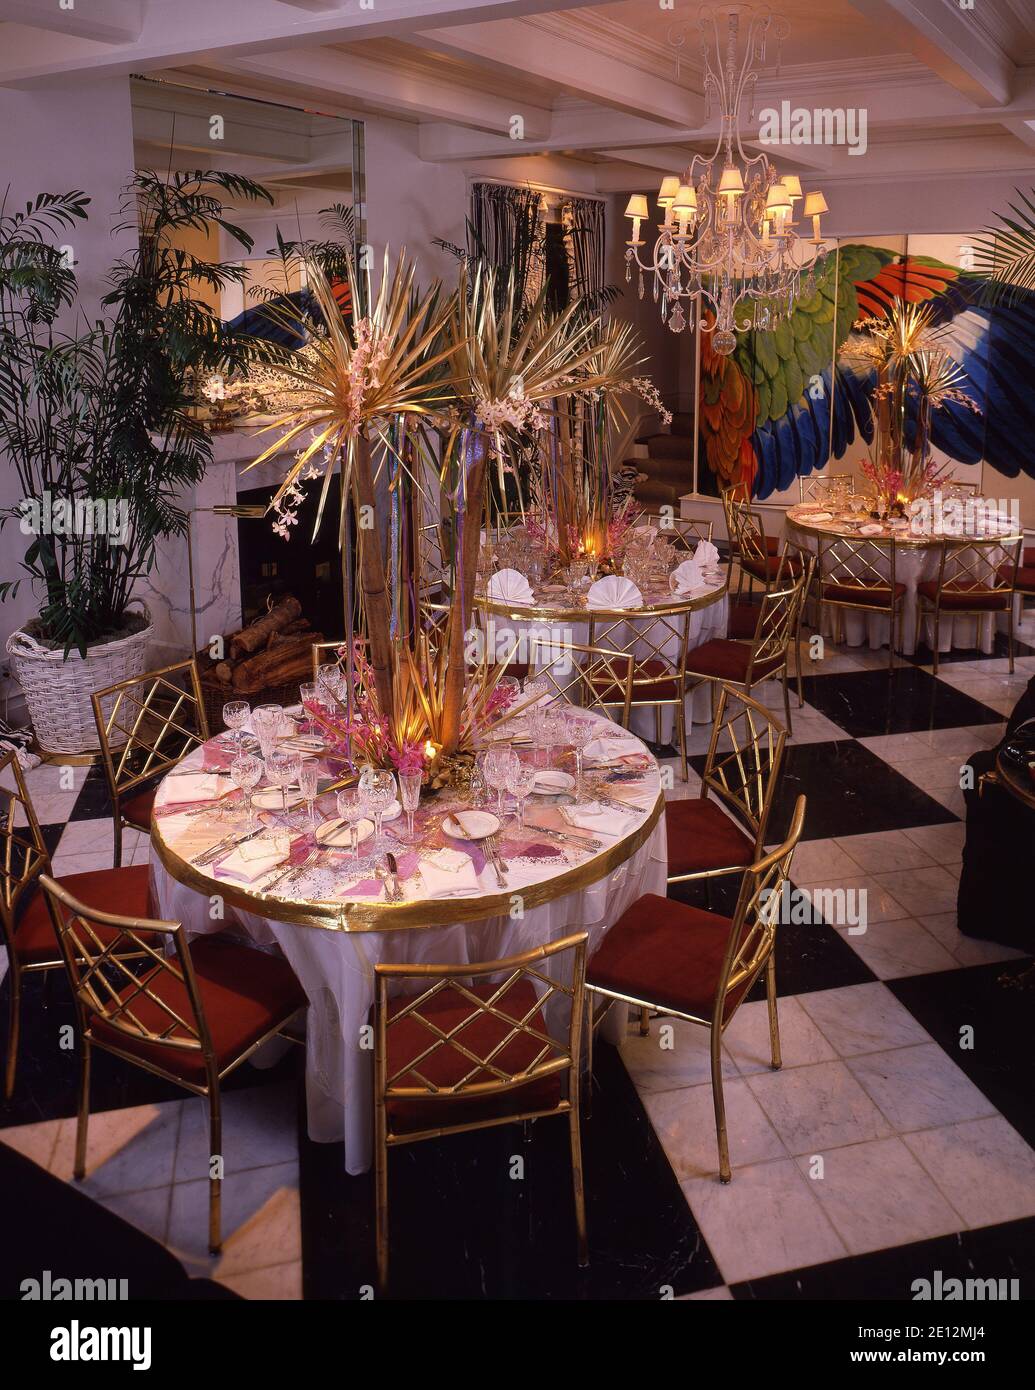 Formal Home interior decoration for a society event. Stock Photo